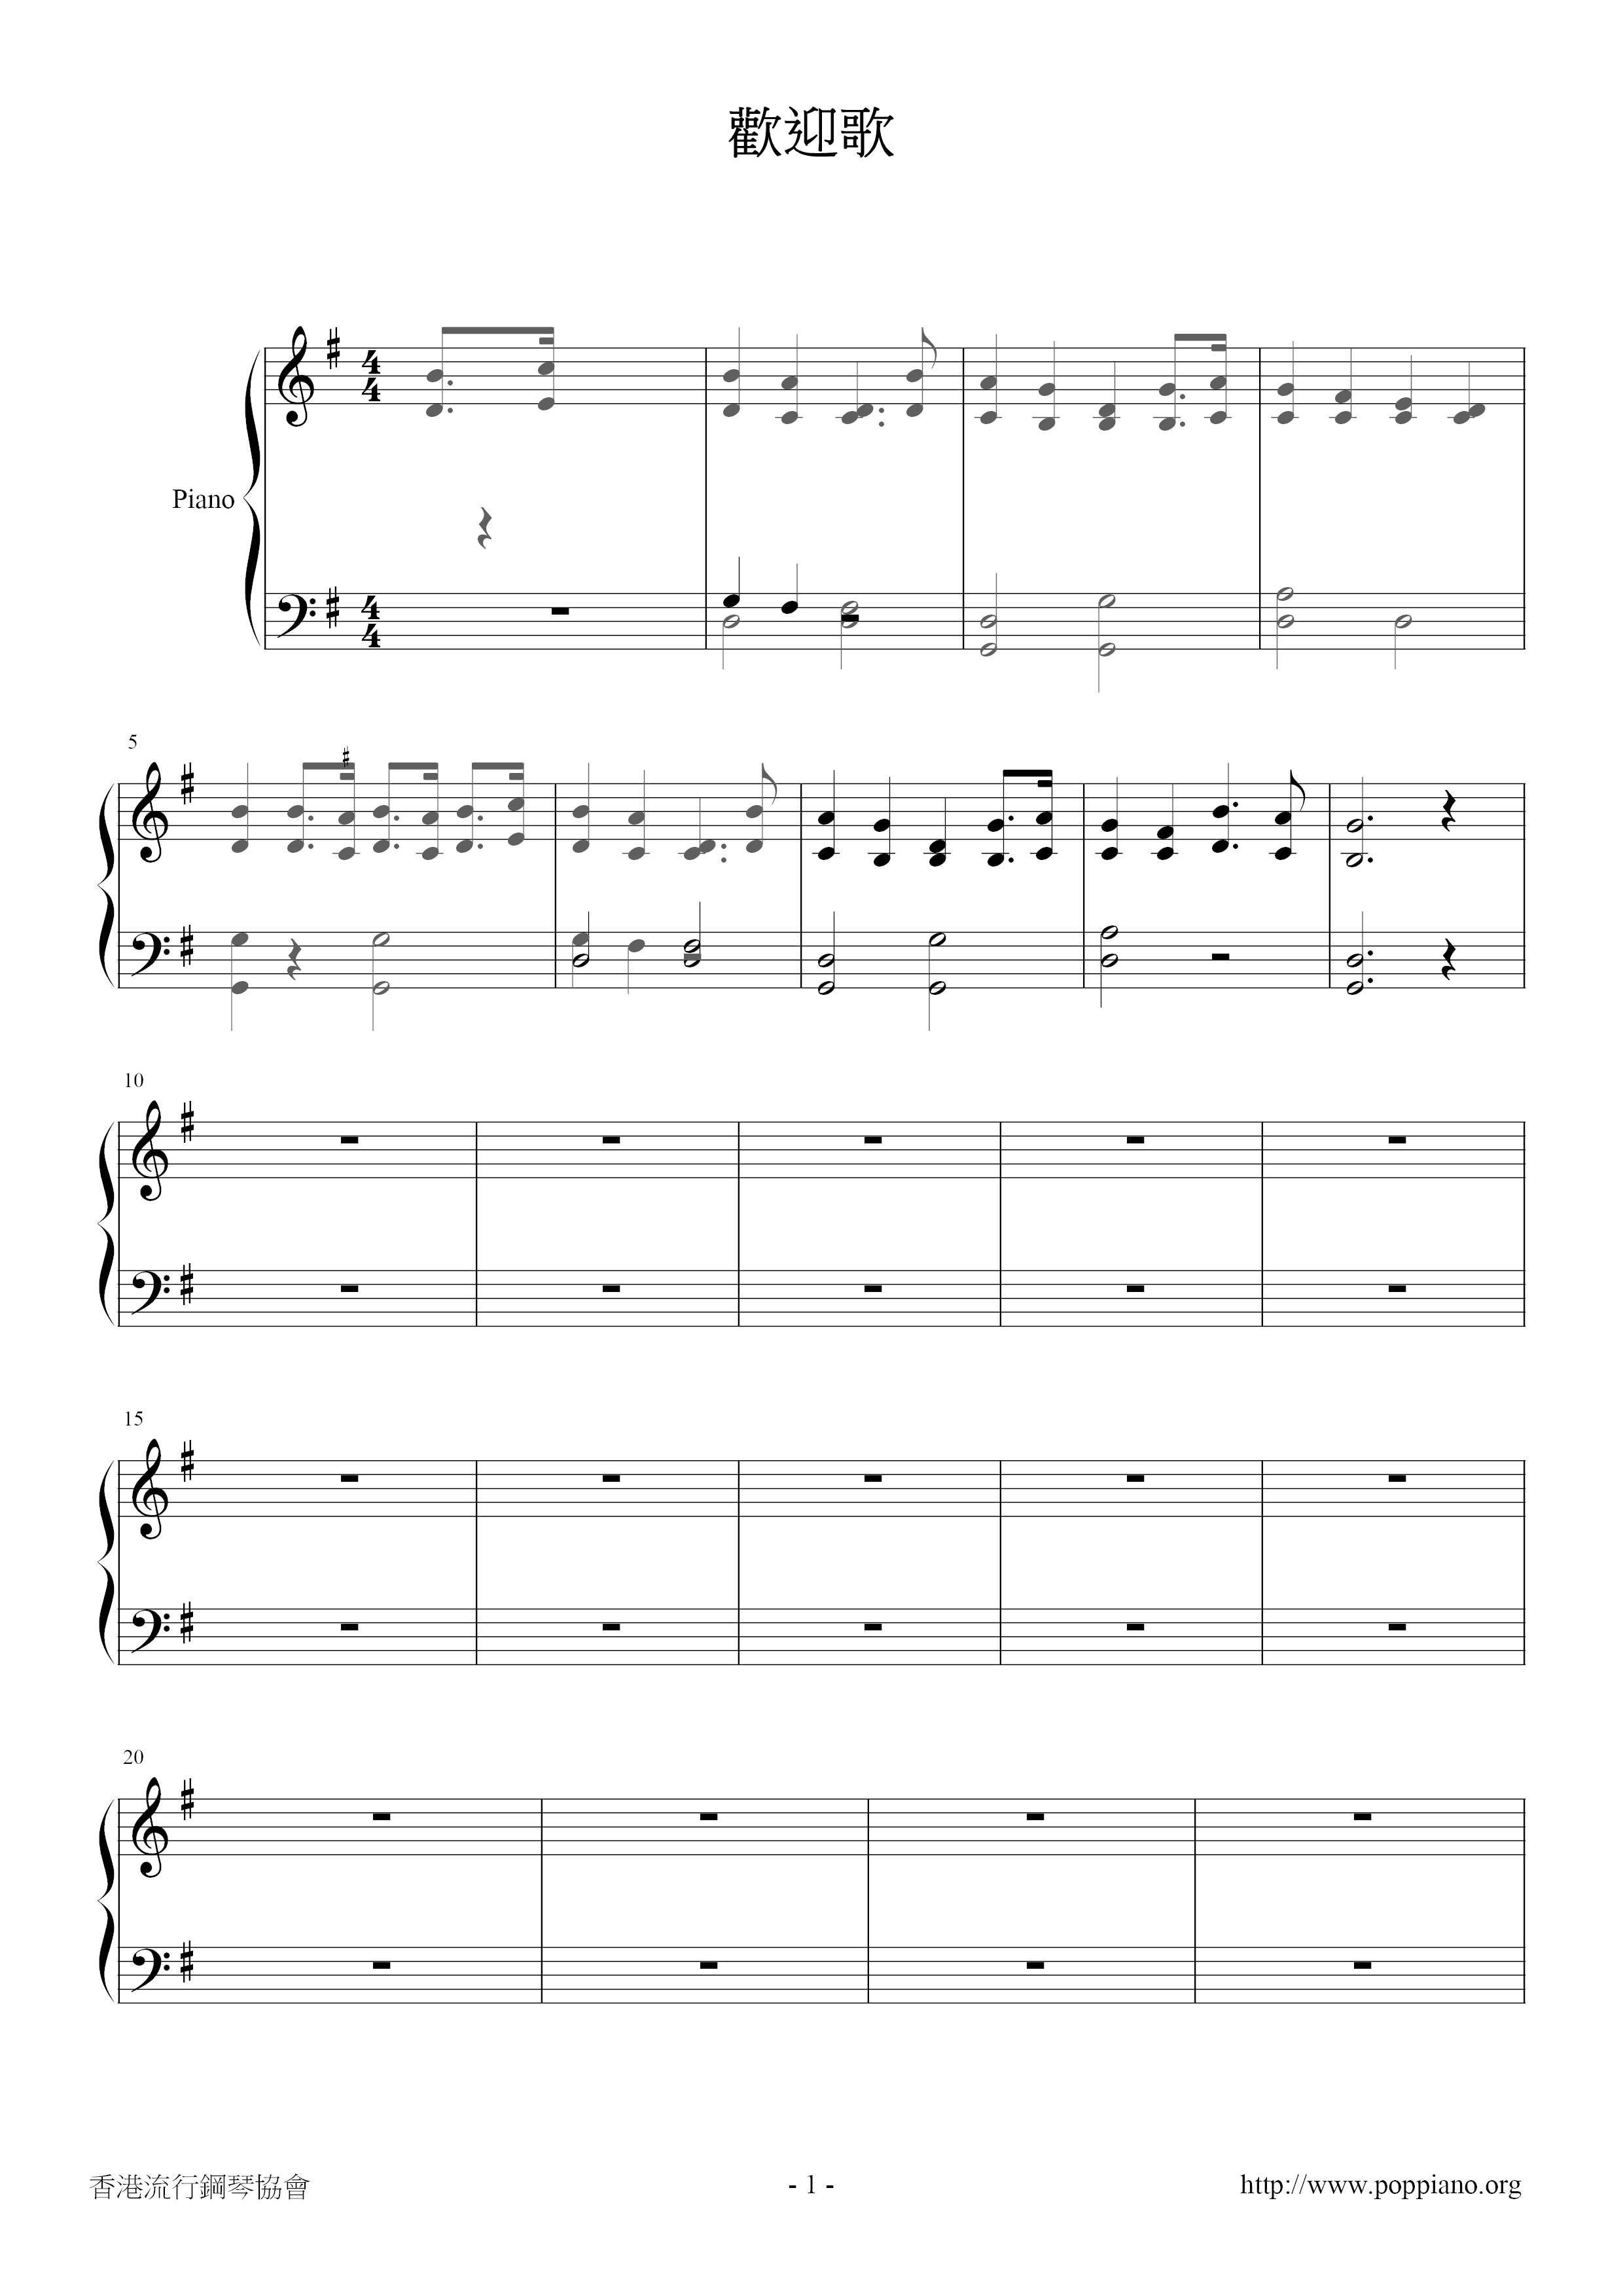 Welcome Song Score